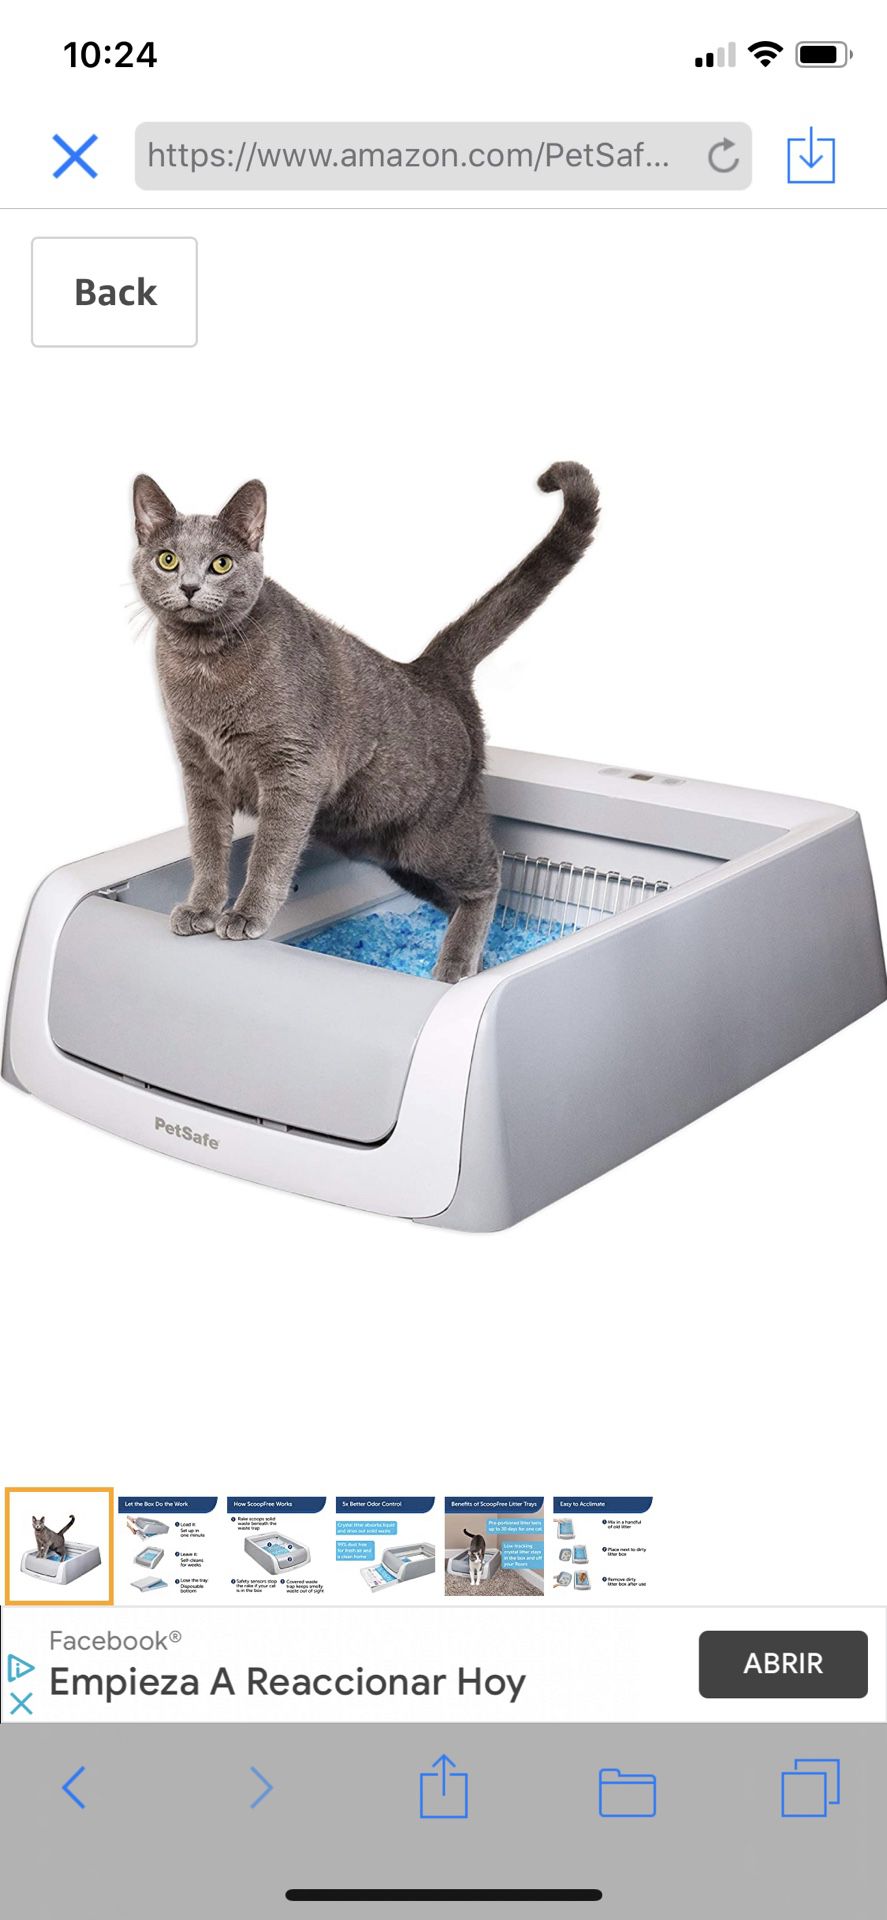 PetSafe ScoopFree Automatic Self-Cleaning Cat Litter Box – Includes Disposable Trays with Crystal.